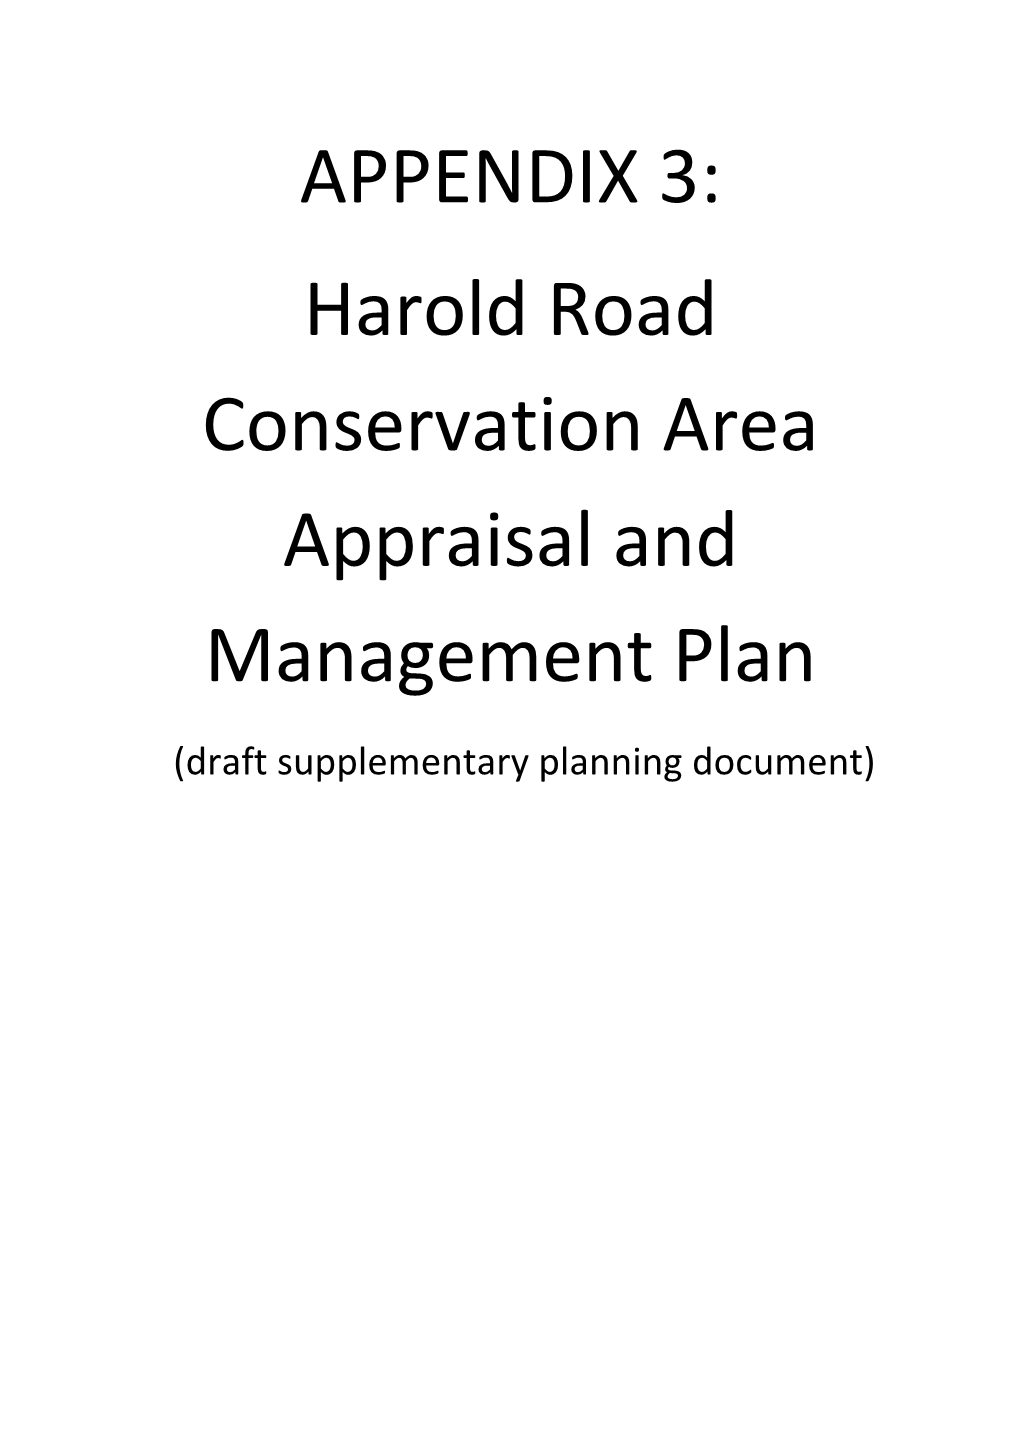 APPENDIX 3: Harold Road Conservation Area Appraisal and Management Plan (Draft Supplementary Planning Document)